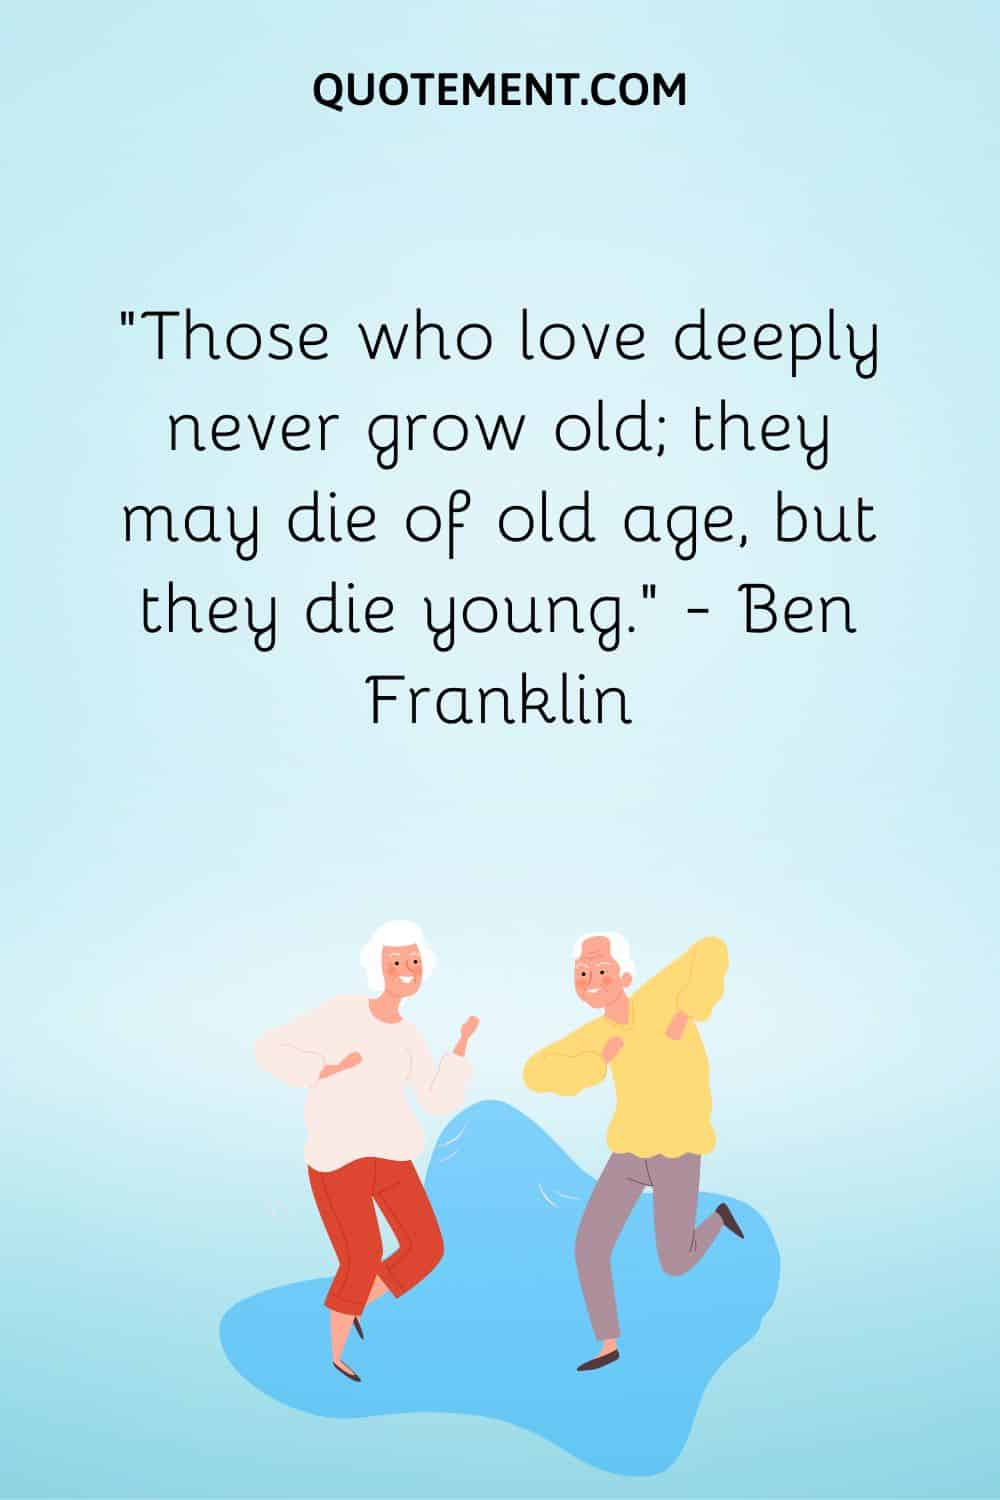 Those who love deeply never grow old; they may die of old age, but they die young